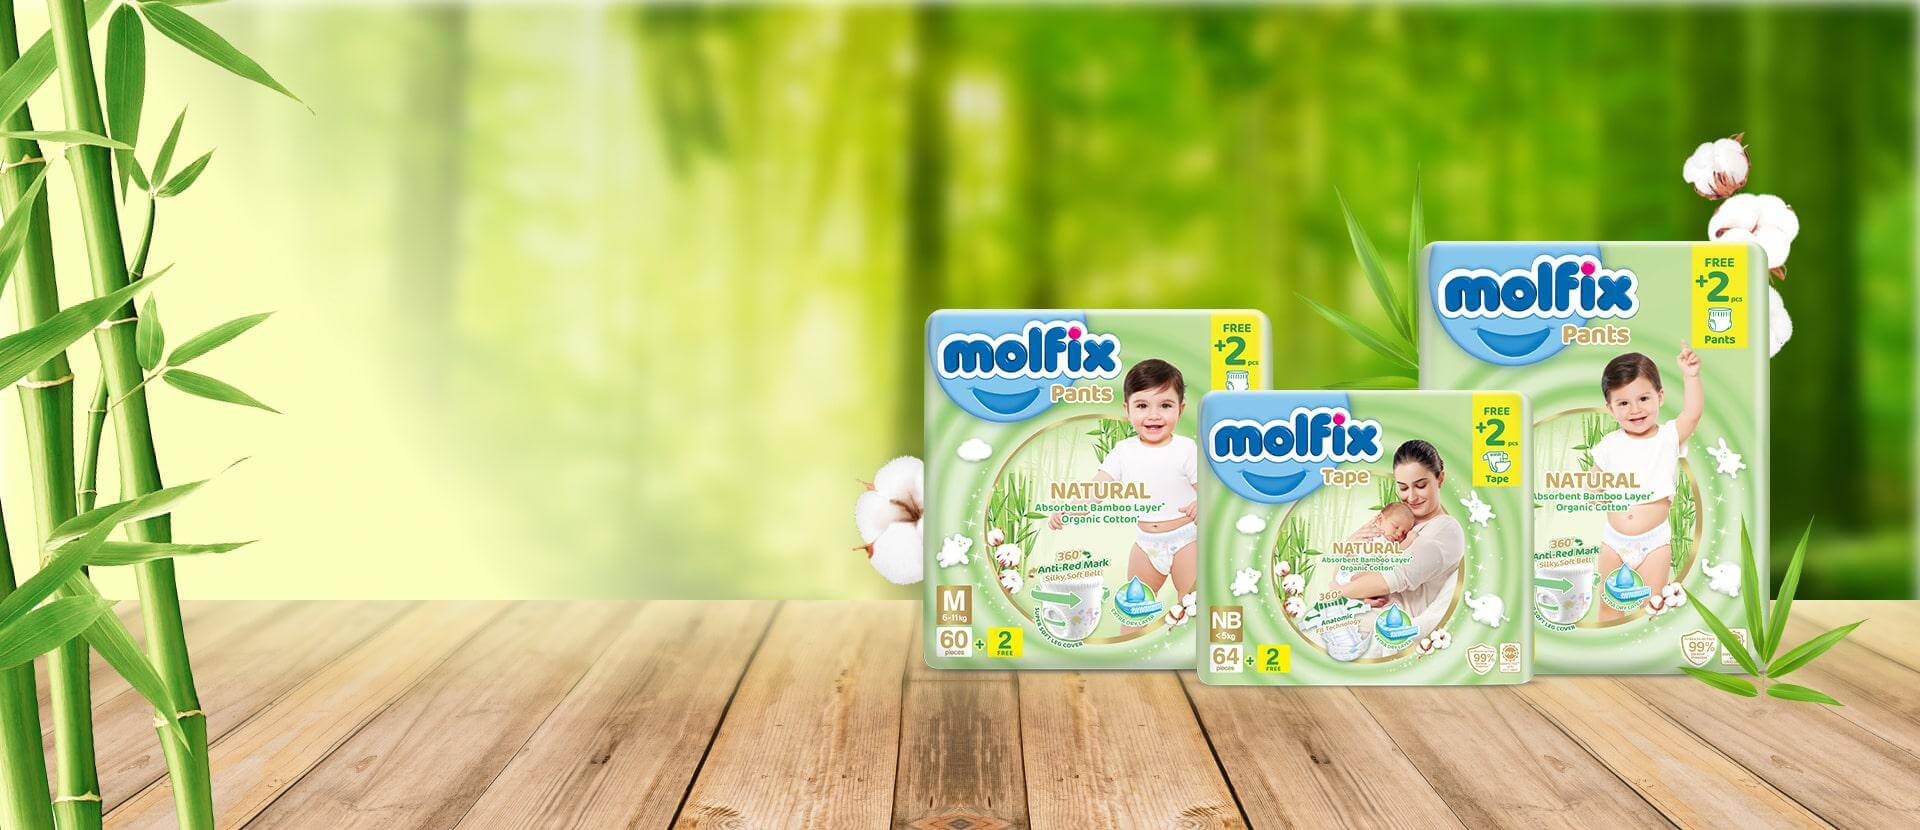 Molfix Now in Malaysia 